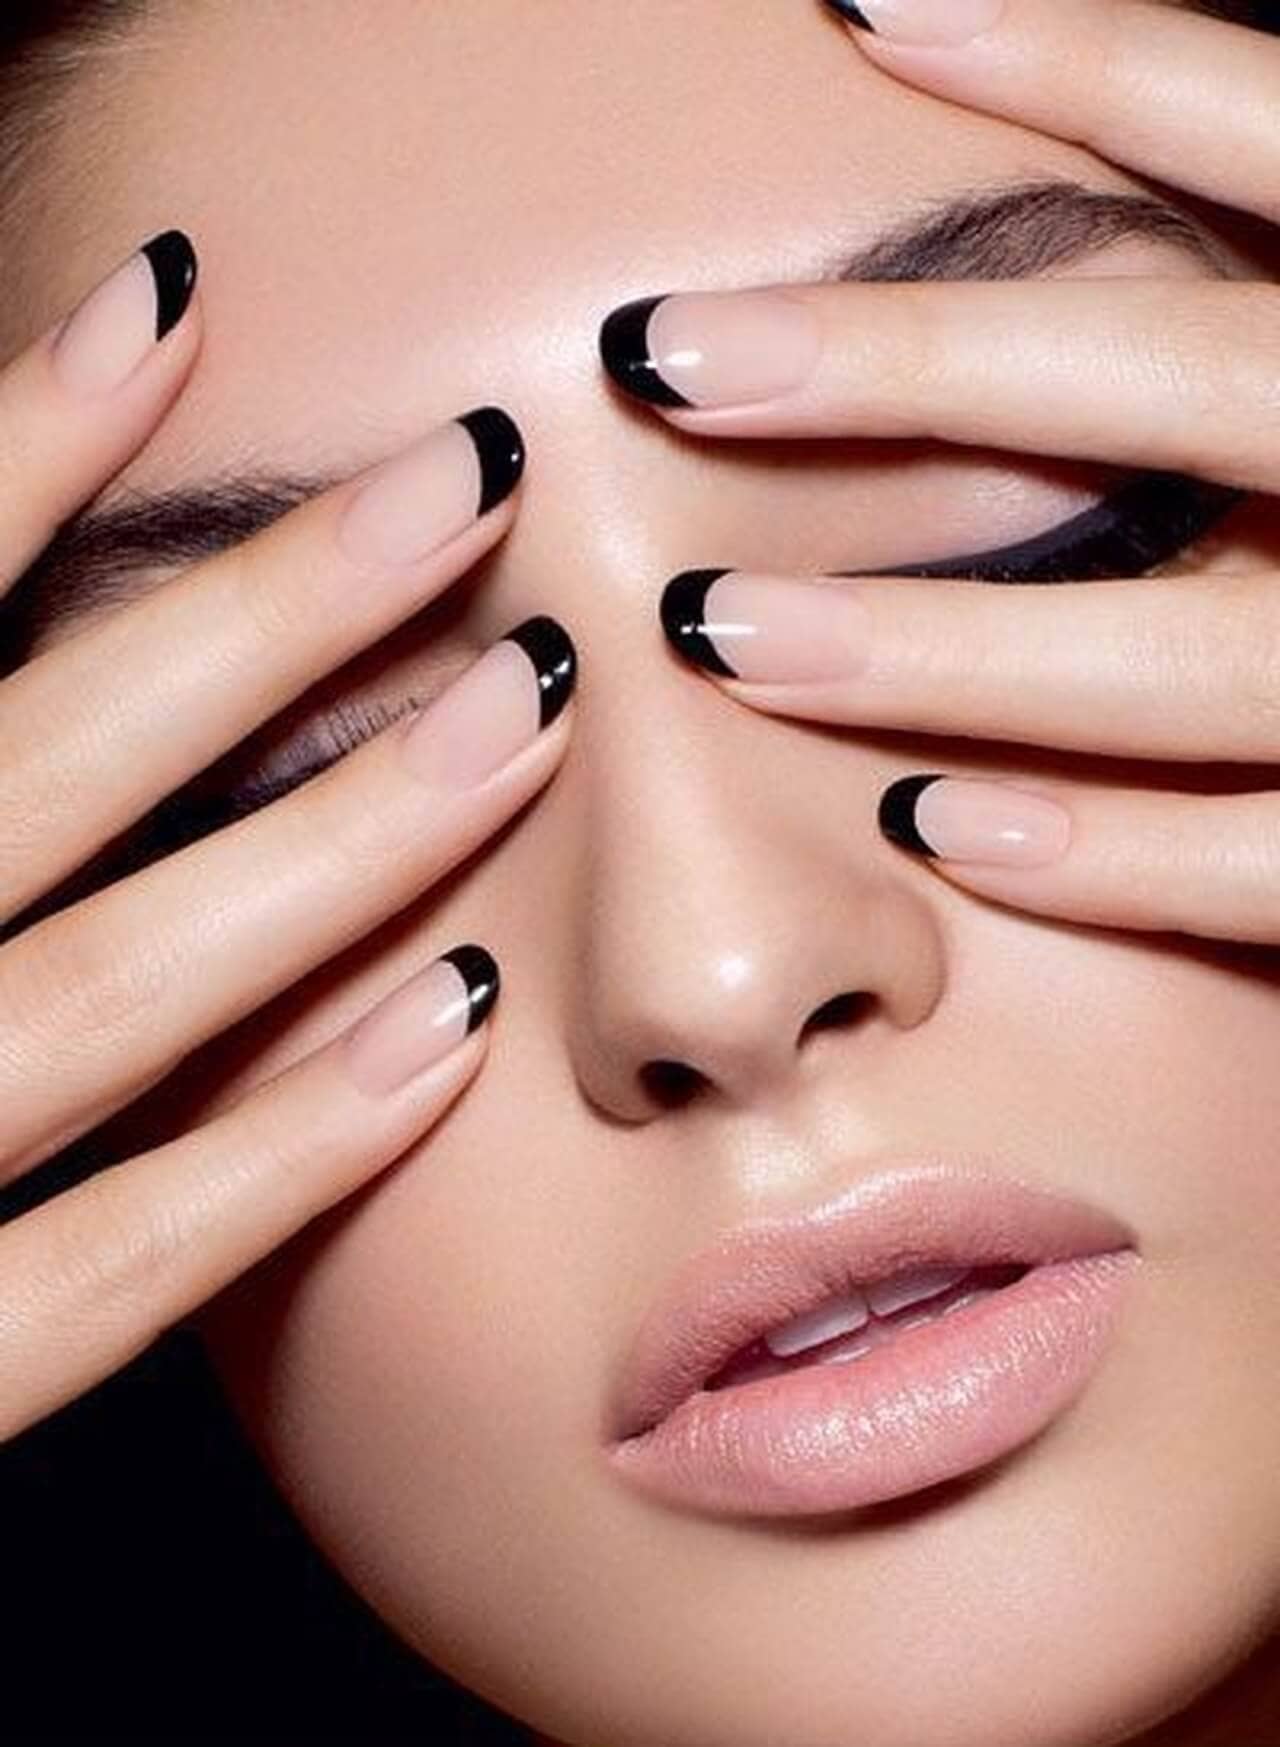 French manicure with black tips - round acrylic nails